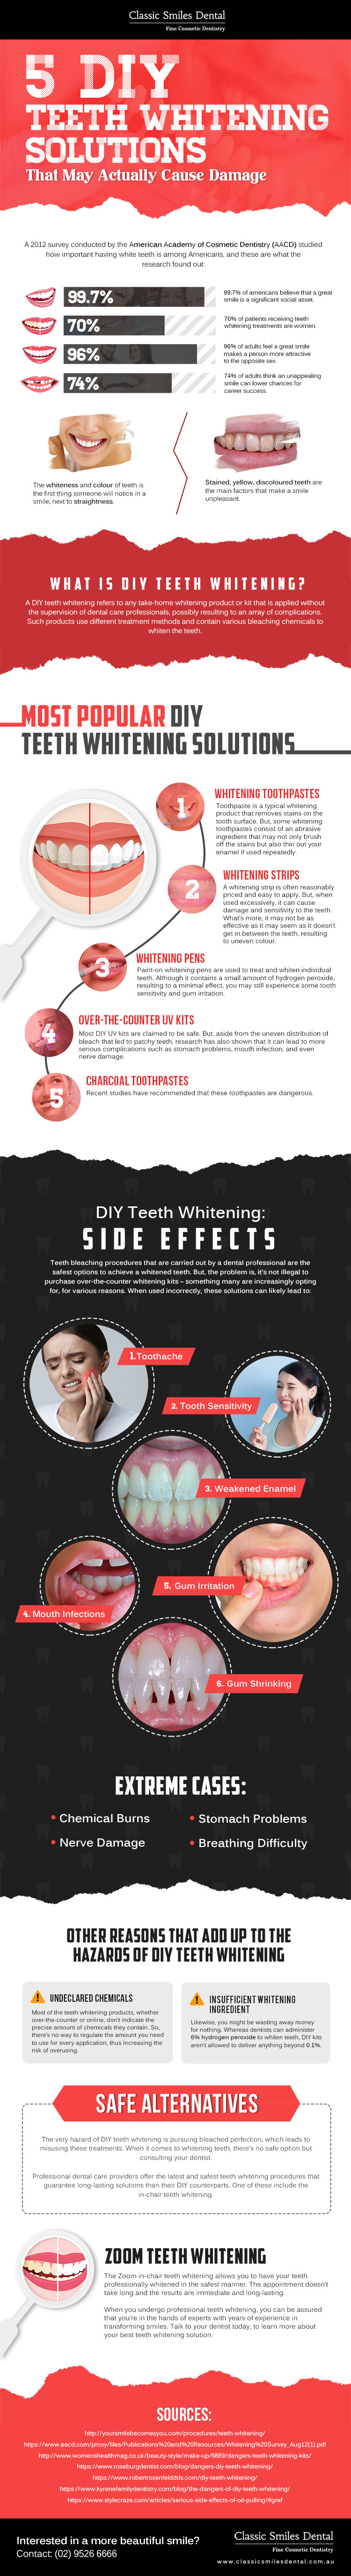 DIY Teeth Whitening Solutions That May Actually Cause Damage